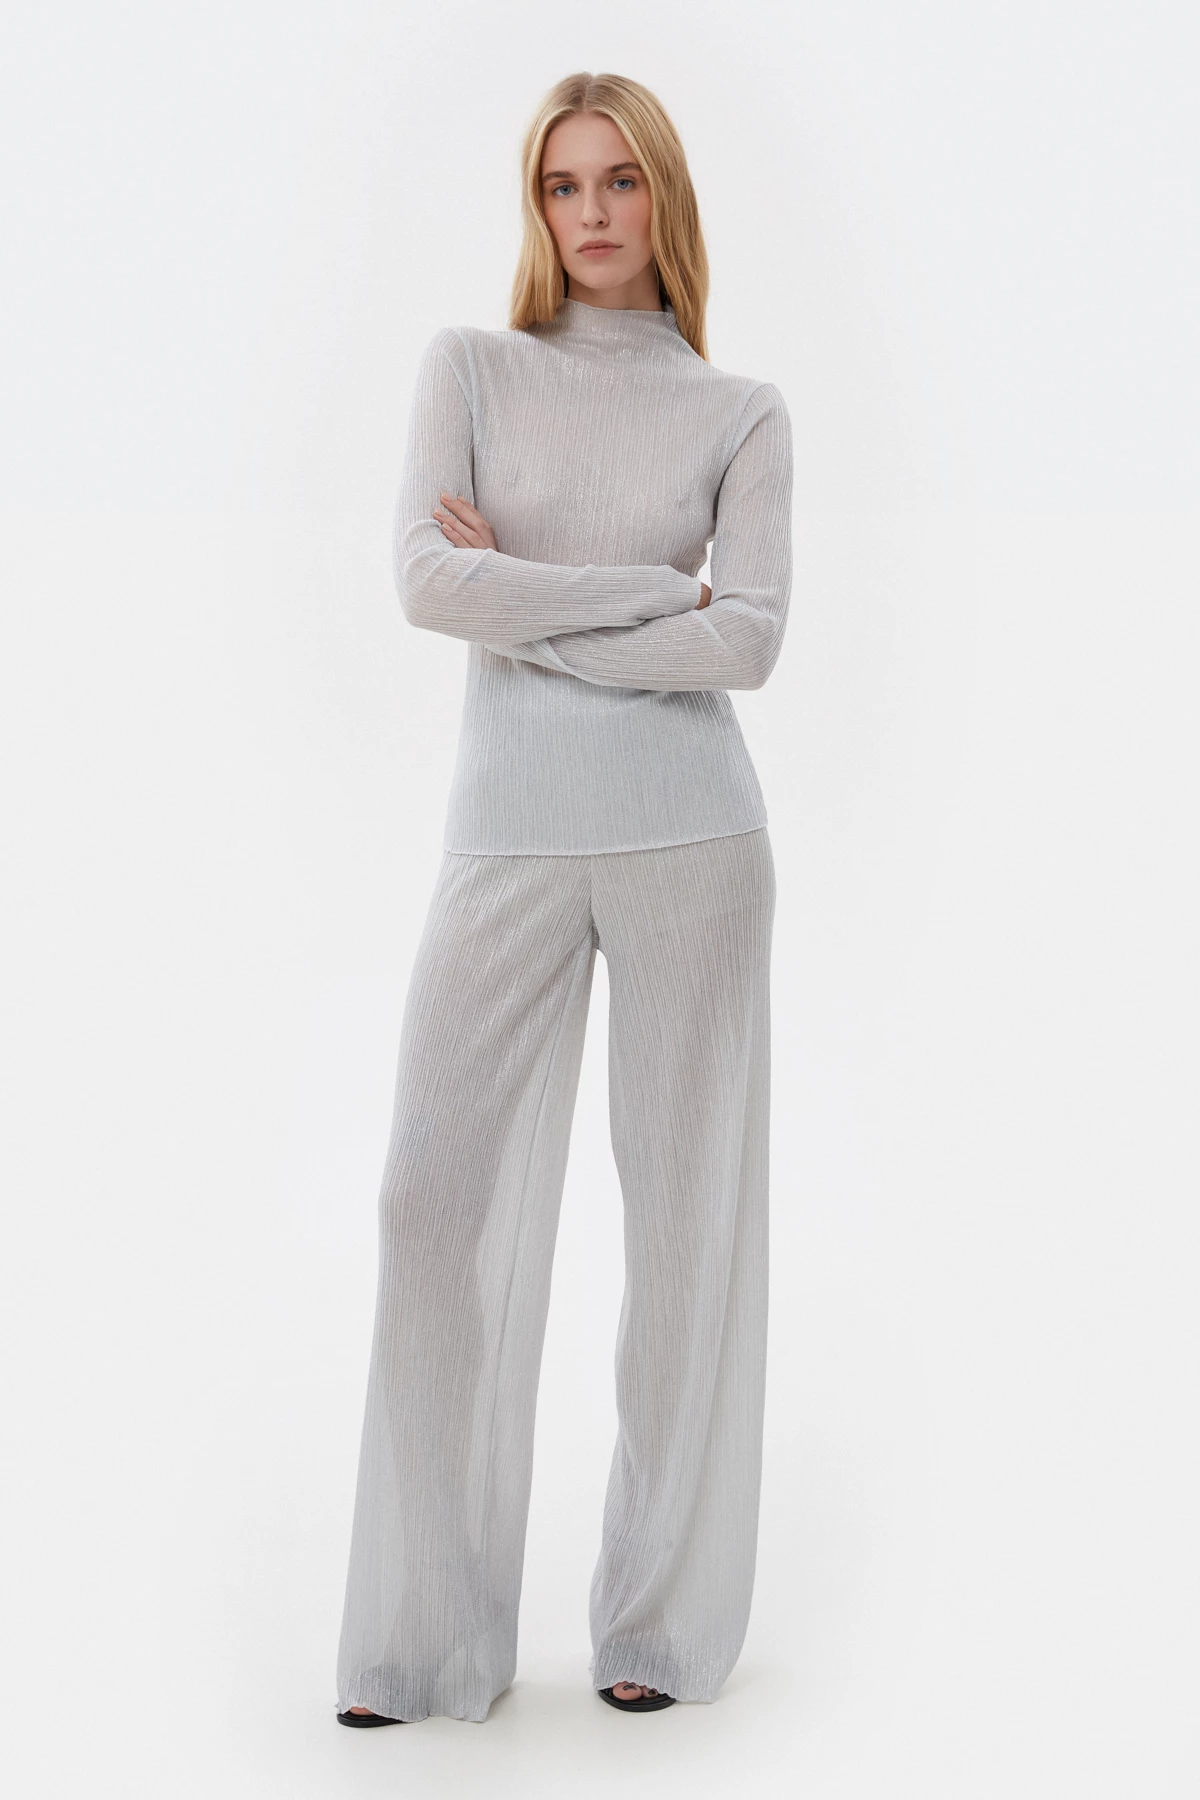 Straight loose trousers in silver pleated knit Estro x MustHave, photo 6